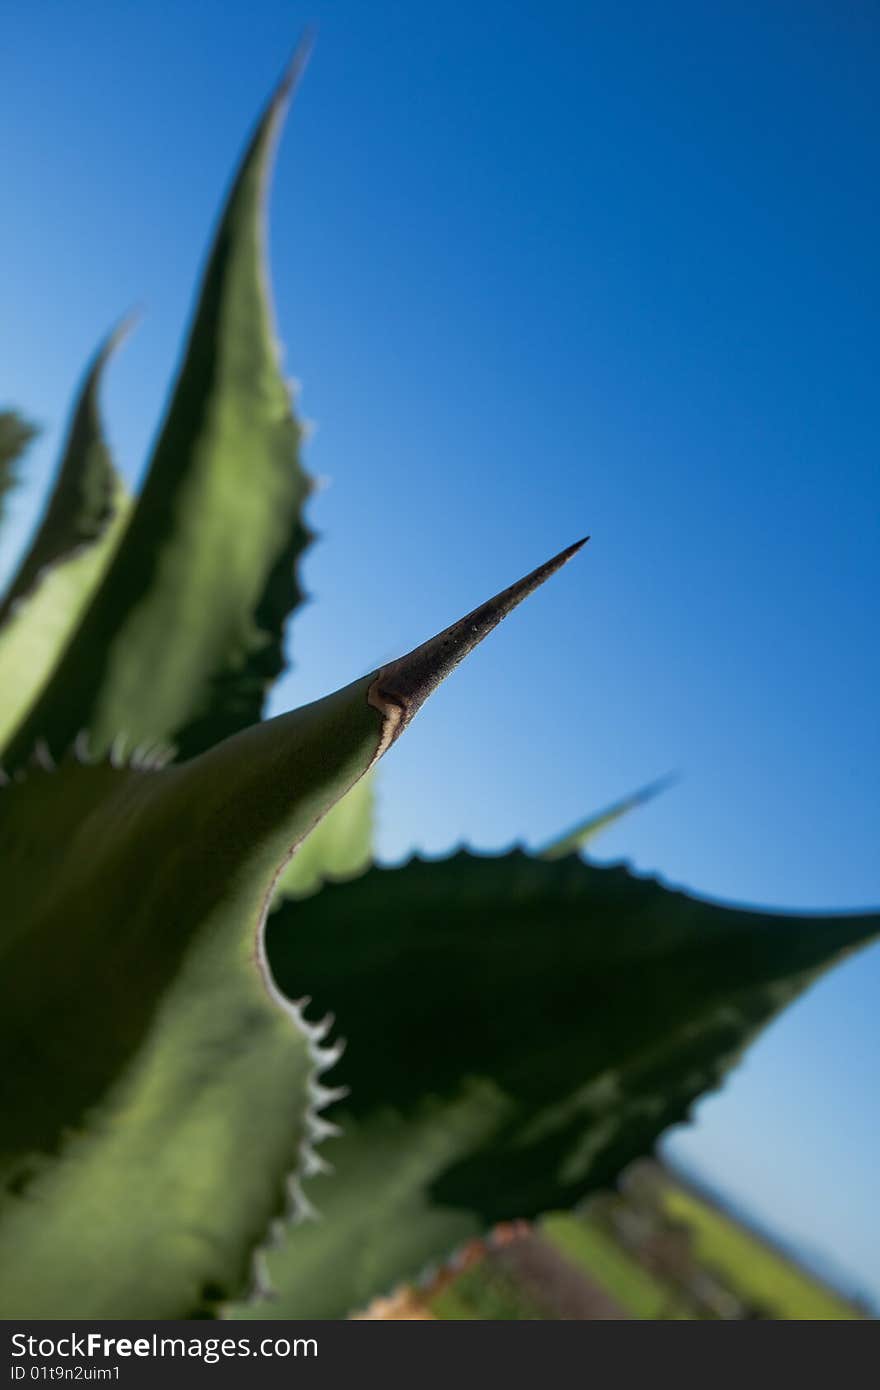 Huge thorn on the end of a fleshy cactus leaf. Huge thorn on the end of a fleshy cactus leaf